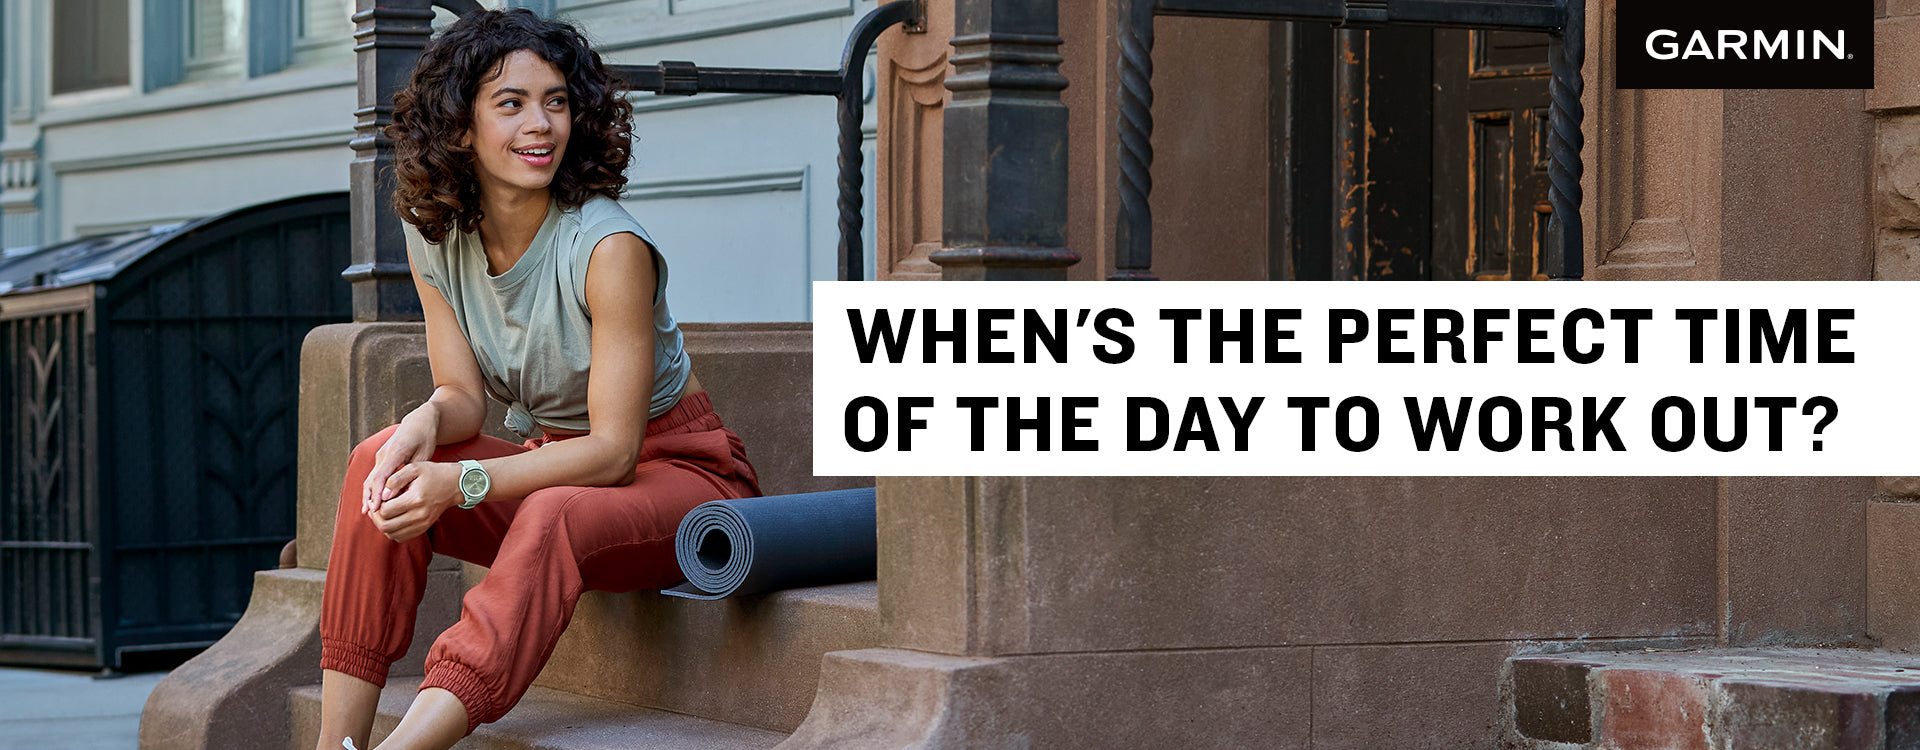 When Is the Perfect Time of the Day to Work Out?